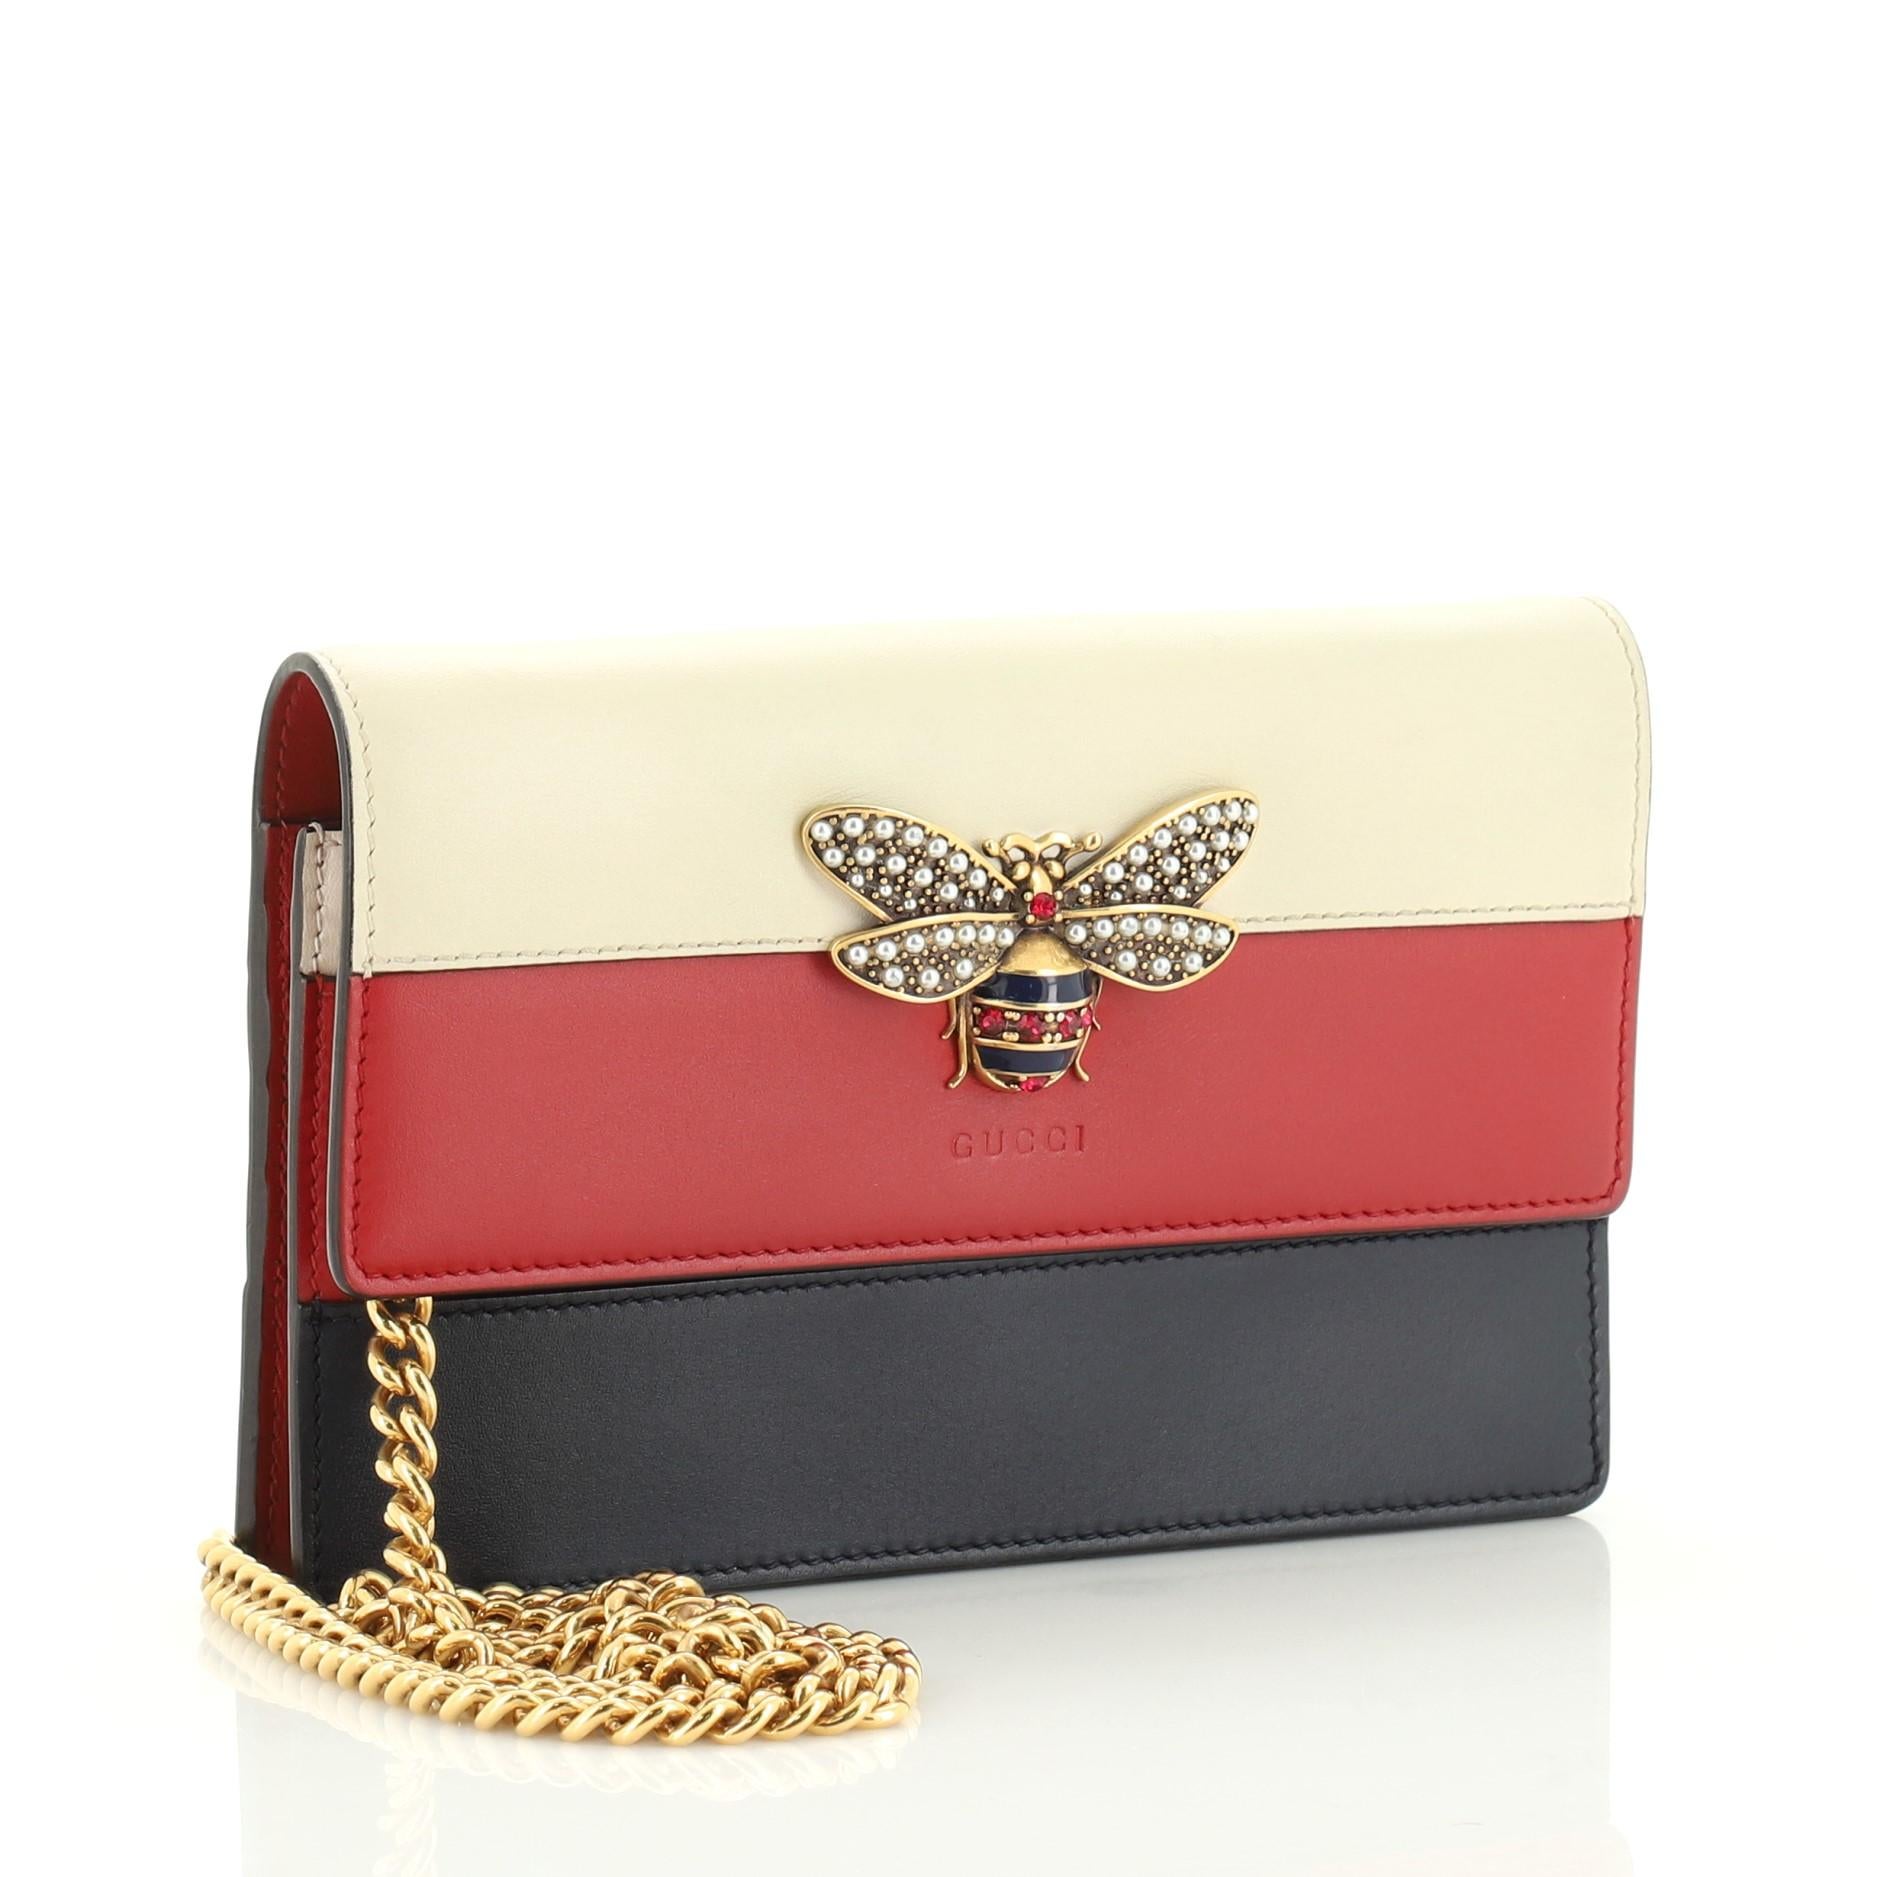 This Gucci Queen Margaret Chain Wallet Leather Mini, crafted from blue, red, and white leather, features a bejeweled bee on its flap, slip pocket under flap, and aged gold-tone hardware. Its snap button closure opens to a brown and red fabric and